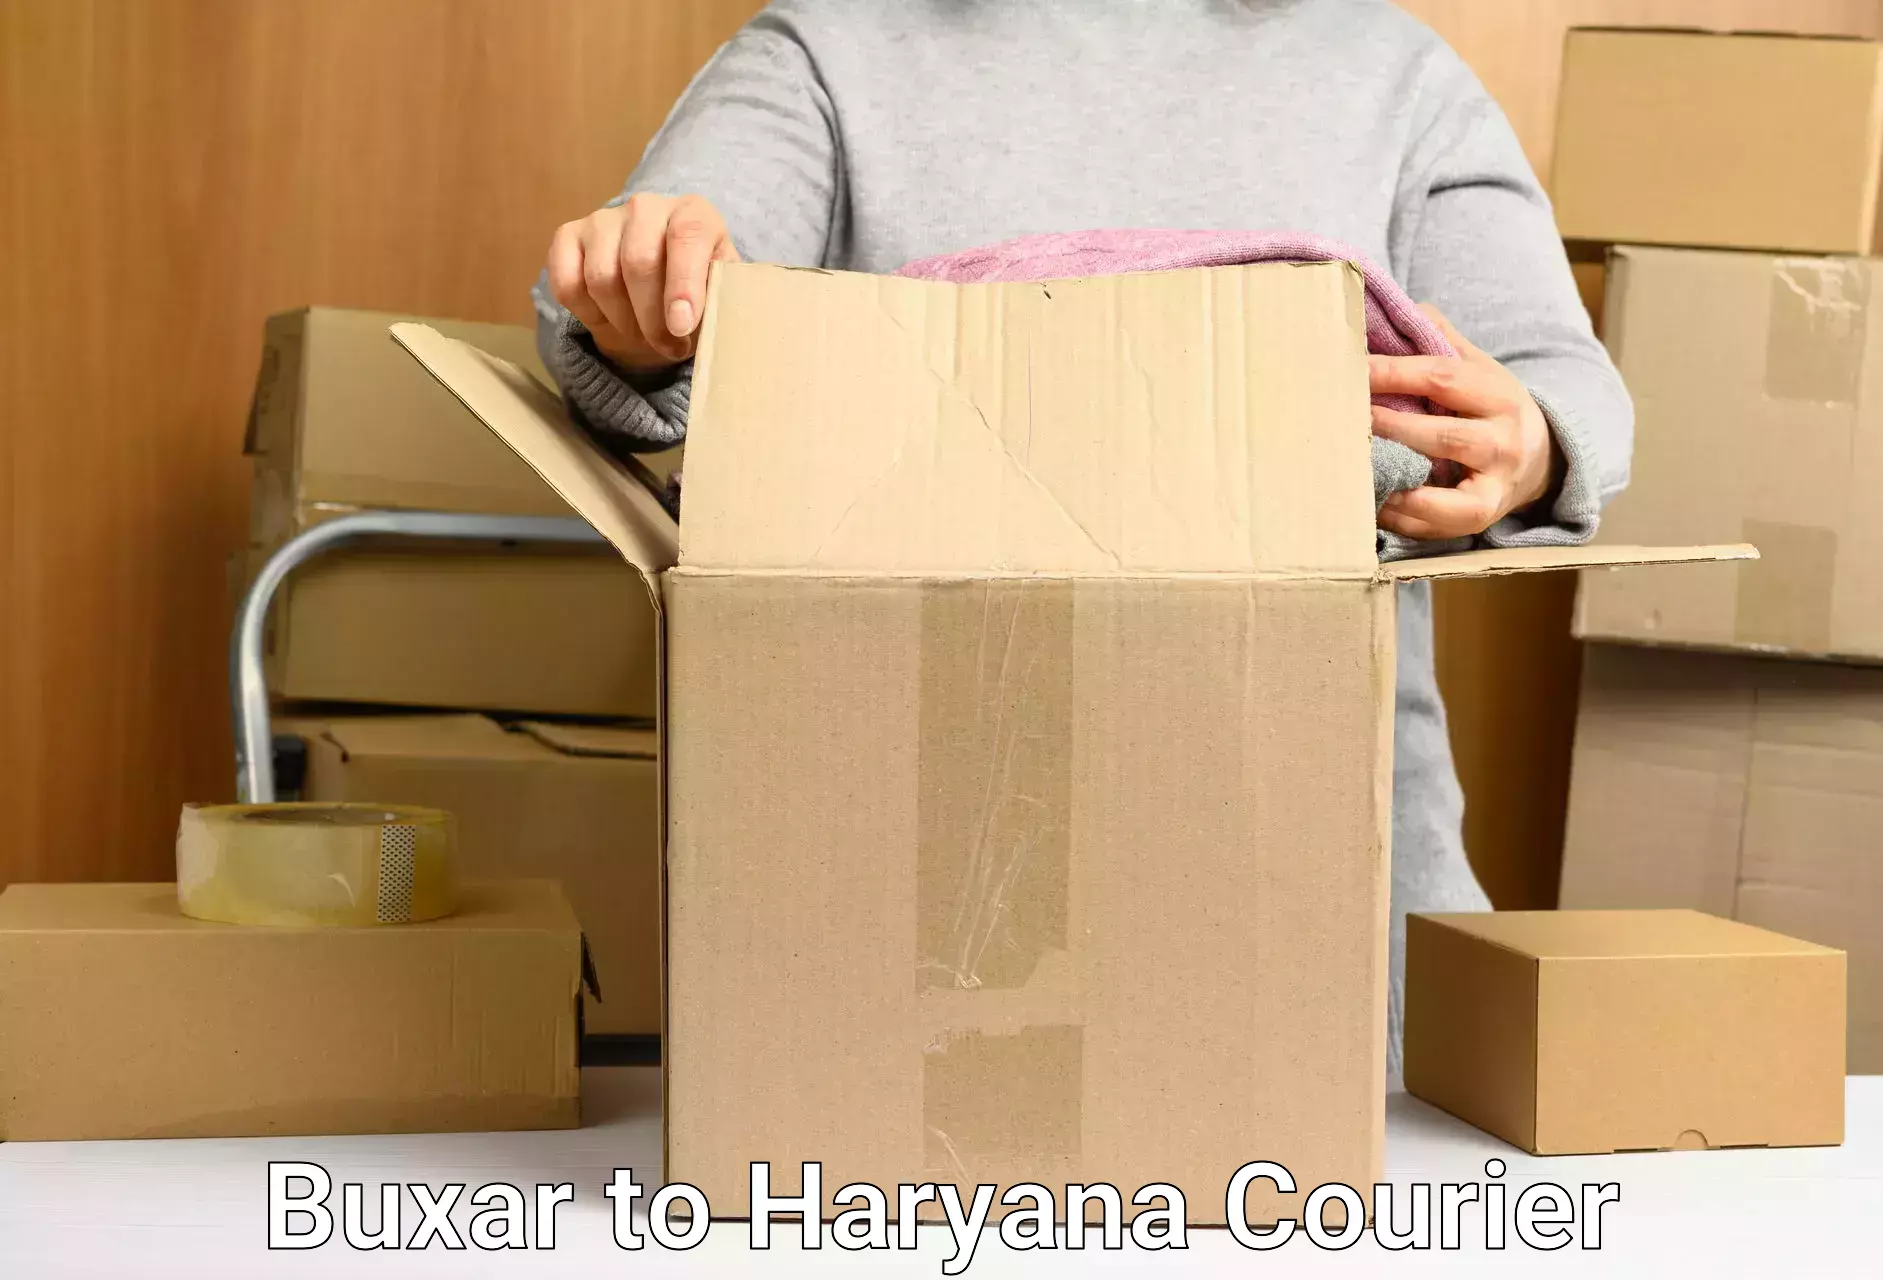 Smart shipping technology in Buxar to Sonipat